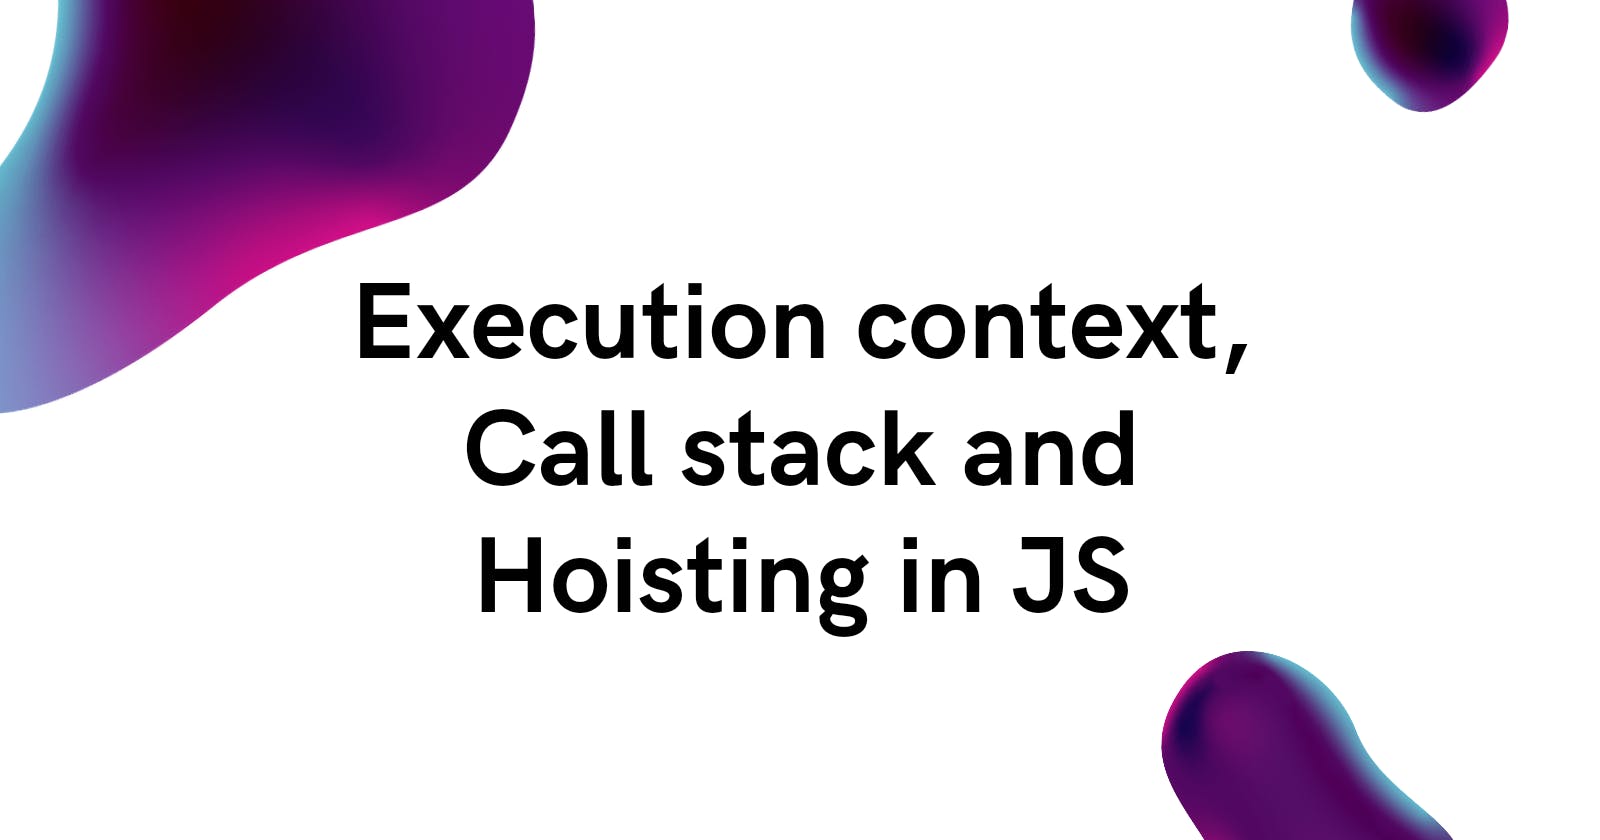 Making JS less scary with knowledge of Execution context, call stack and hoisting